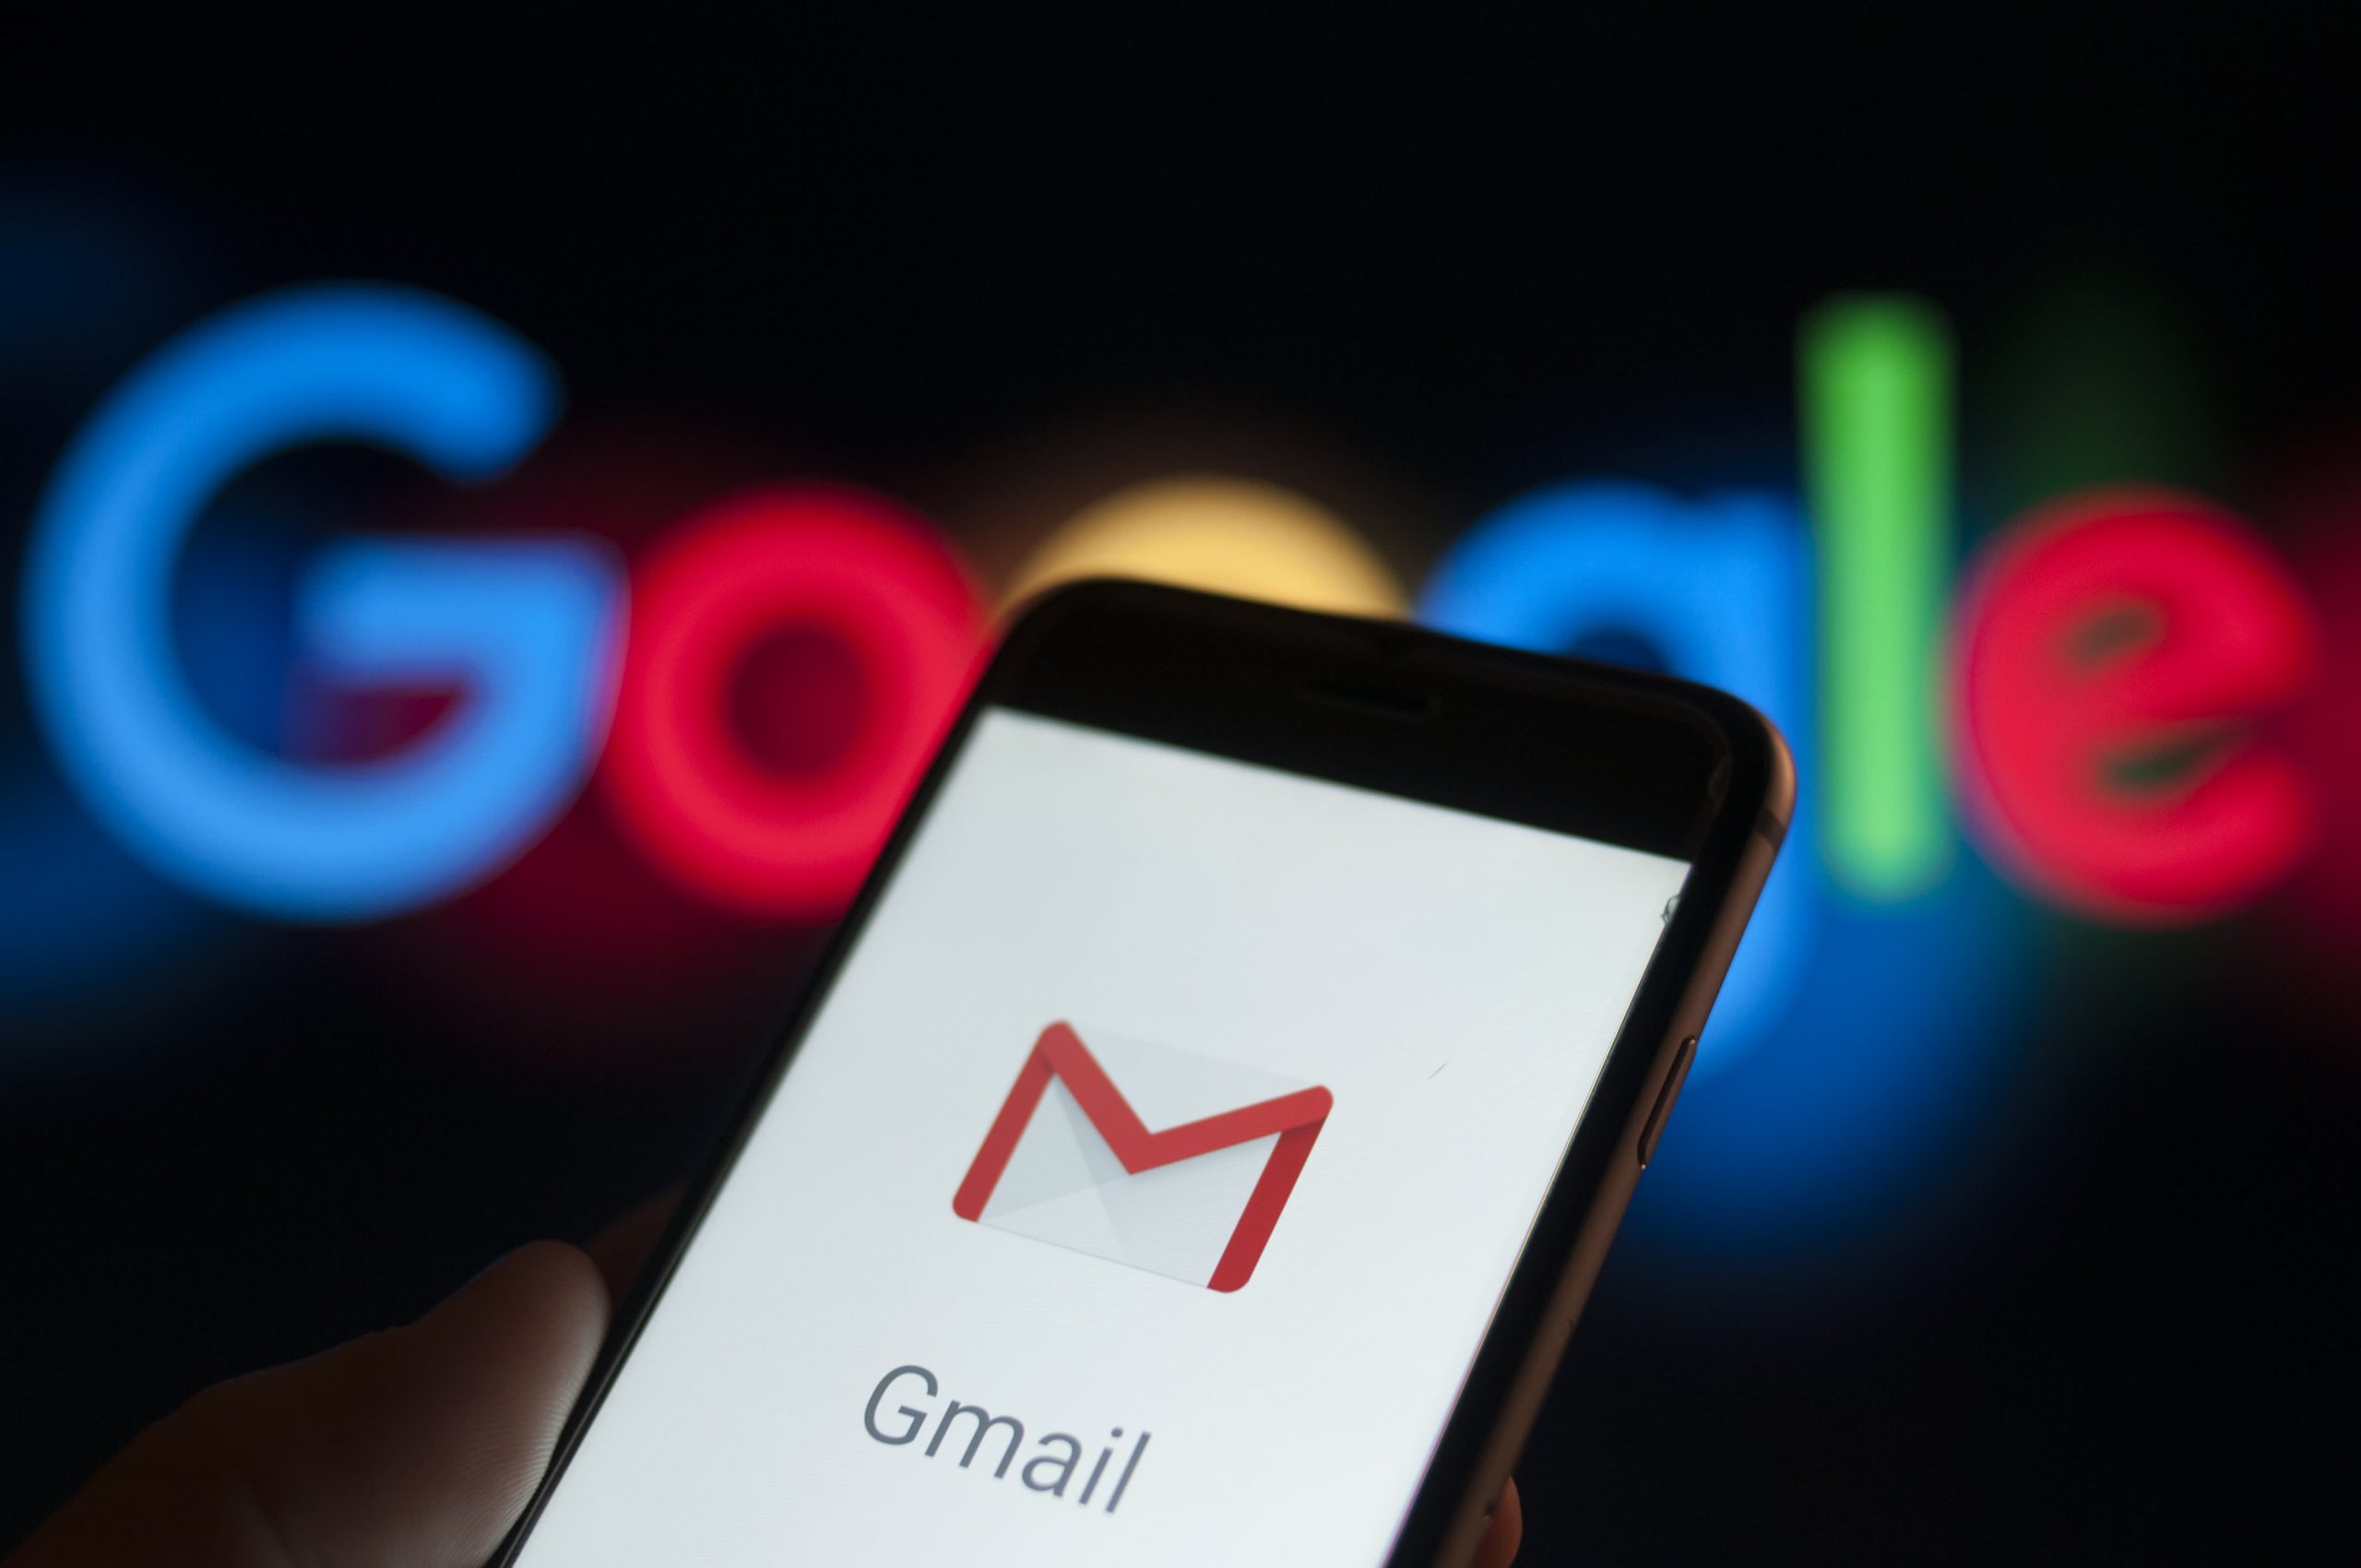 Google suffers widespread outage taking YouTube, Gmail and Drive apps offline